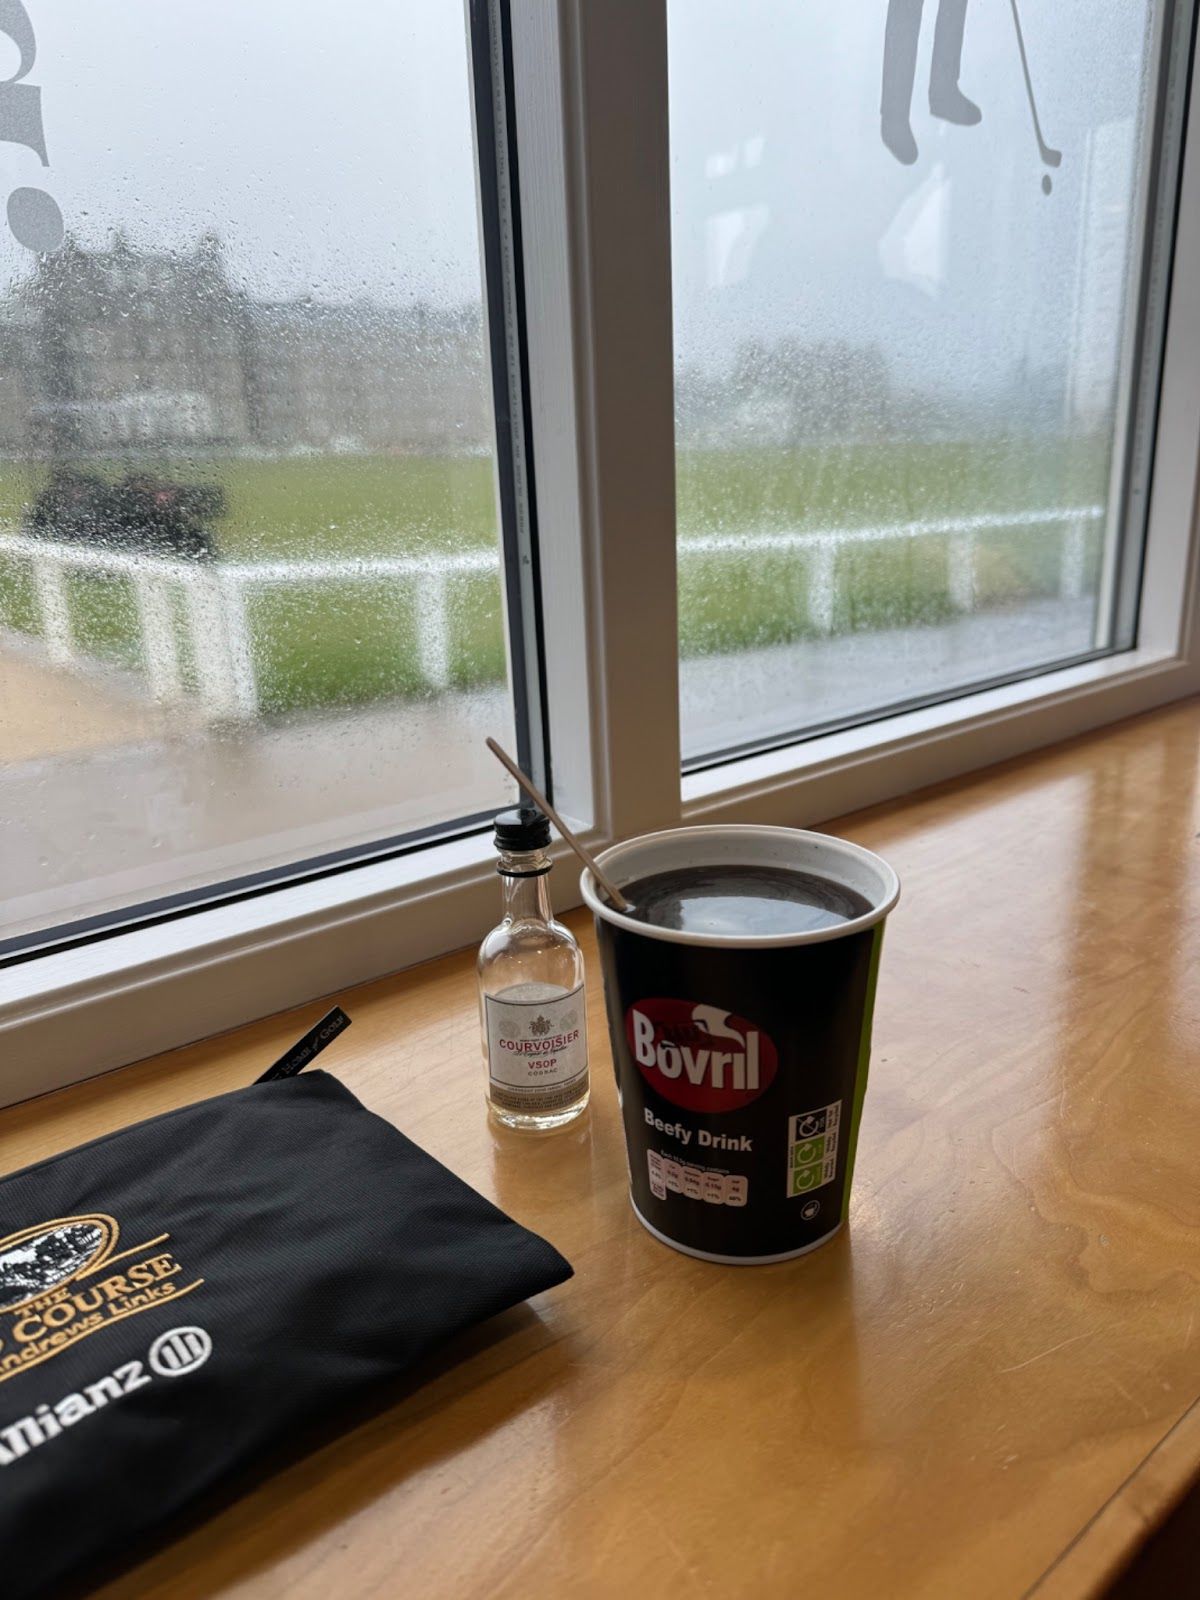 A cup of Bovril sits in front of a rainy window.